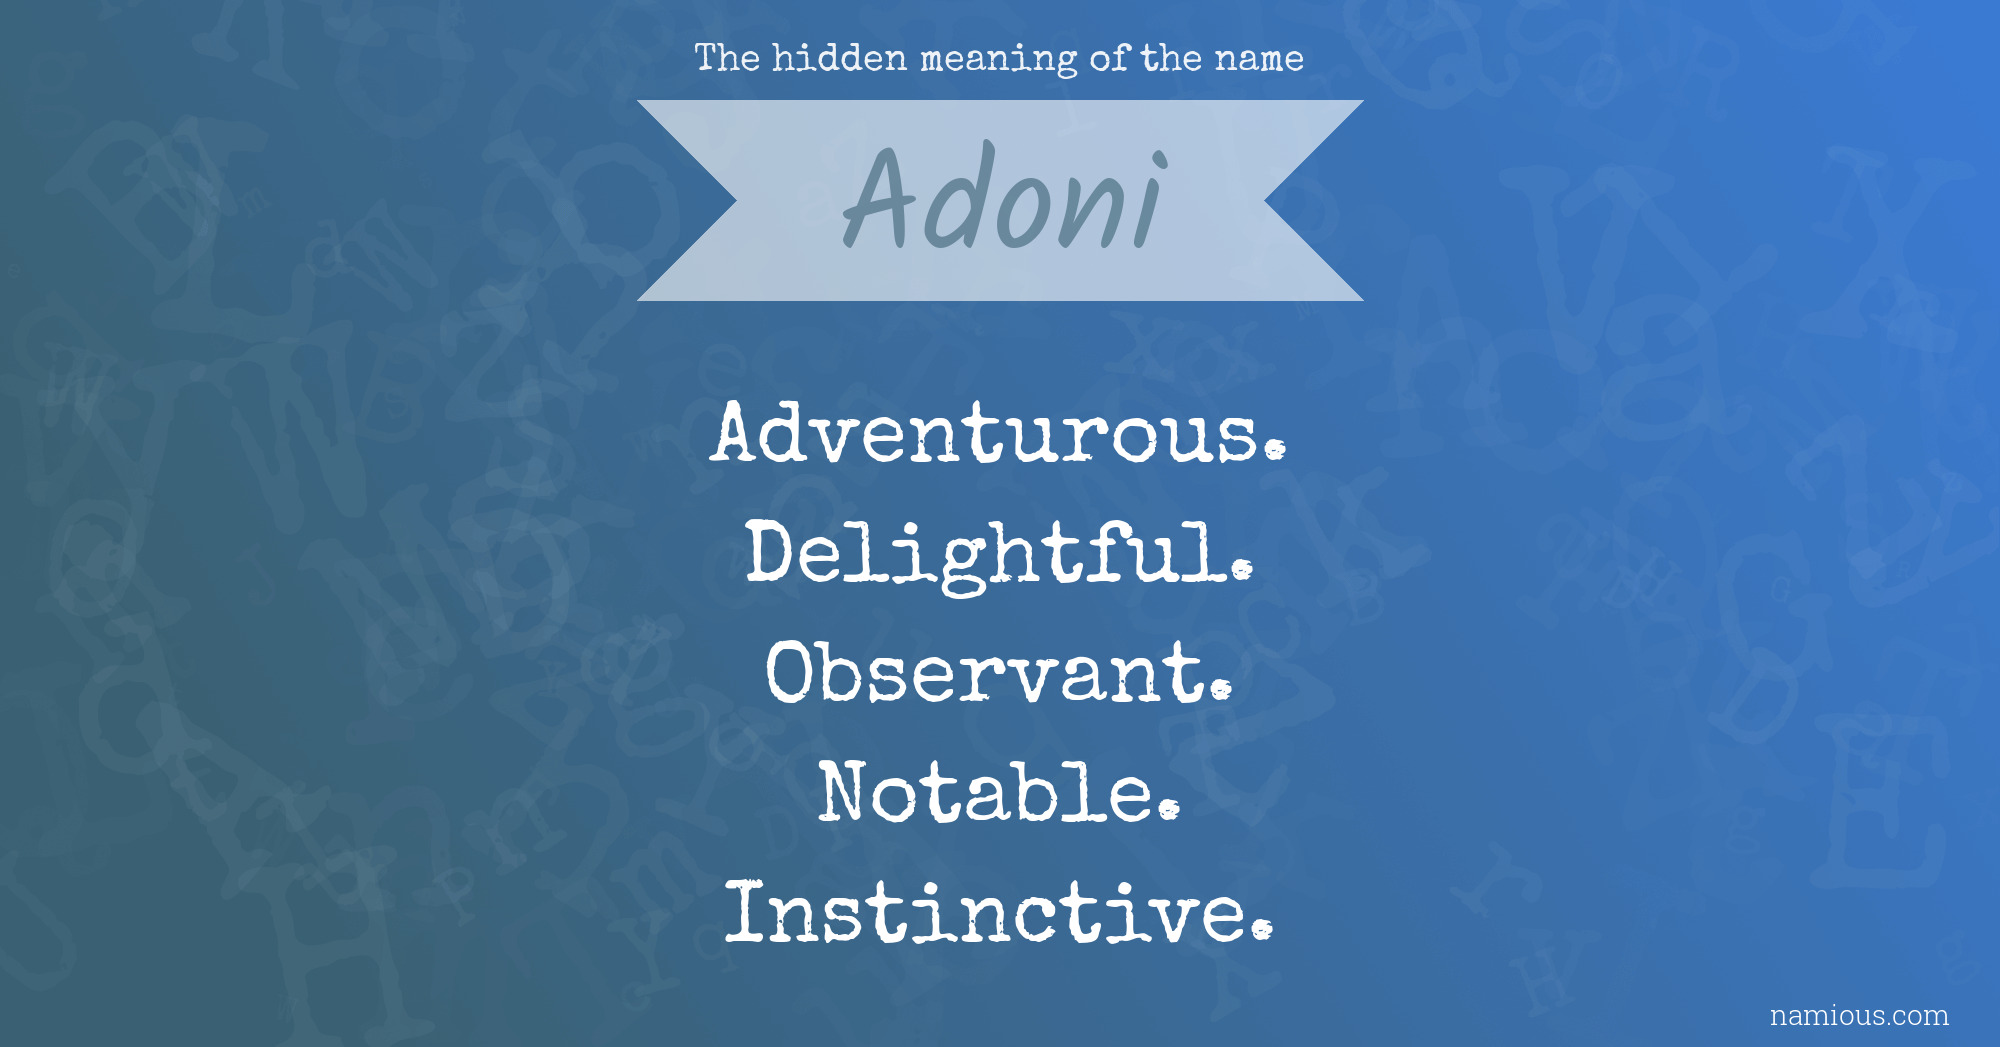 The hidden meaning of the name Adoni